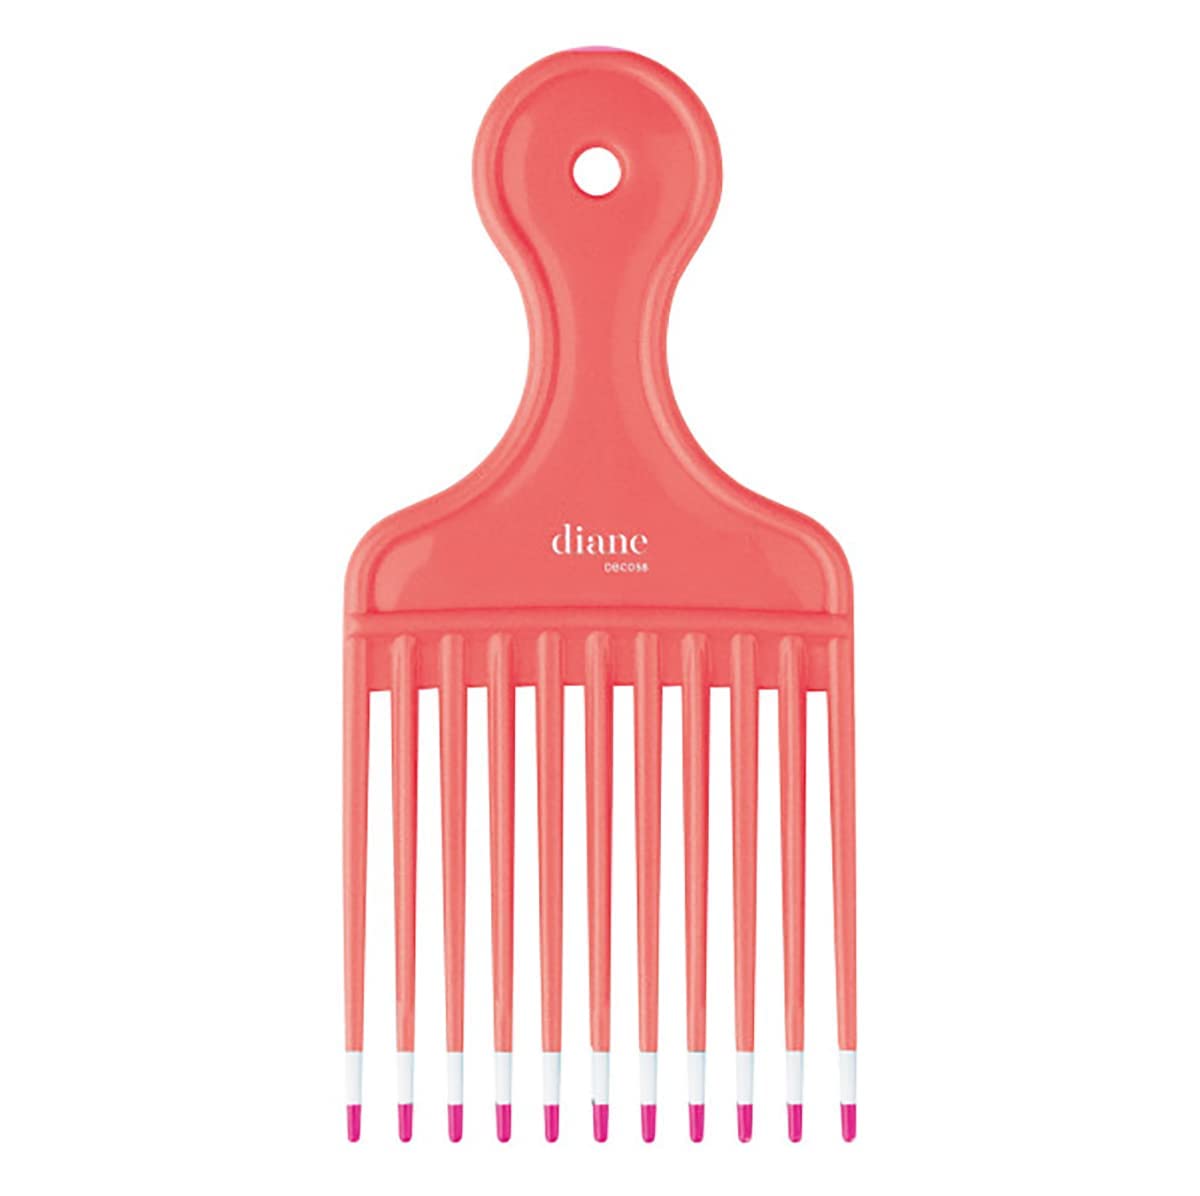 Diane Afro Lifter Comb - Large